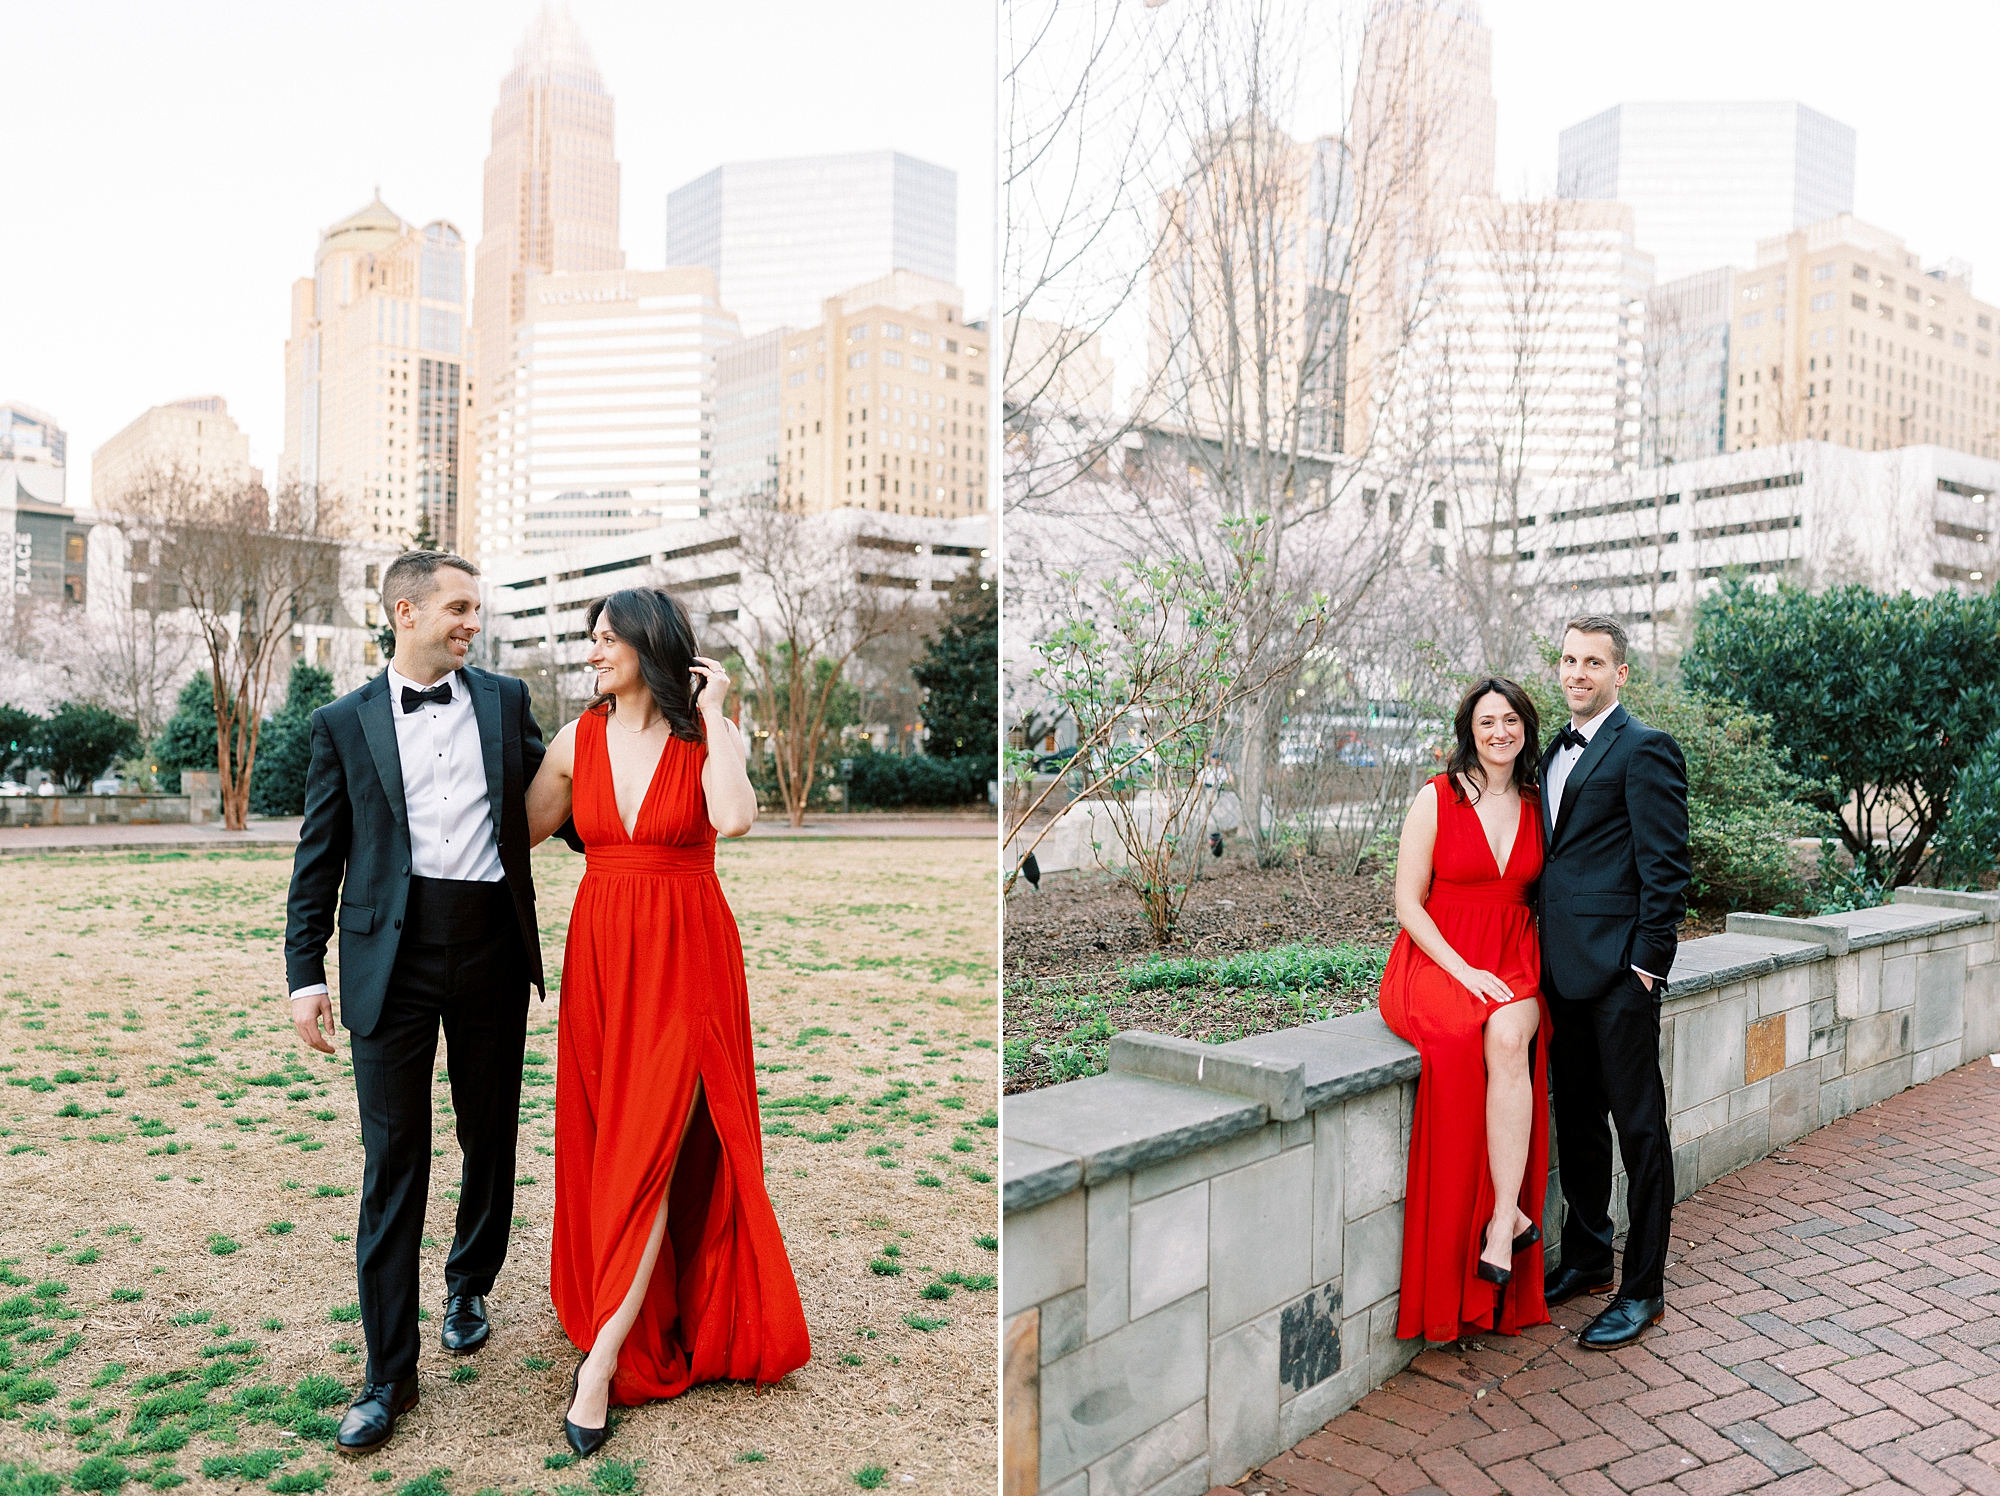 engaged copule poses near waterfall in Romare Bearden Park